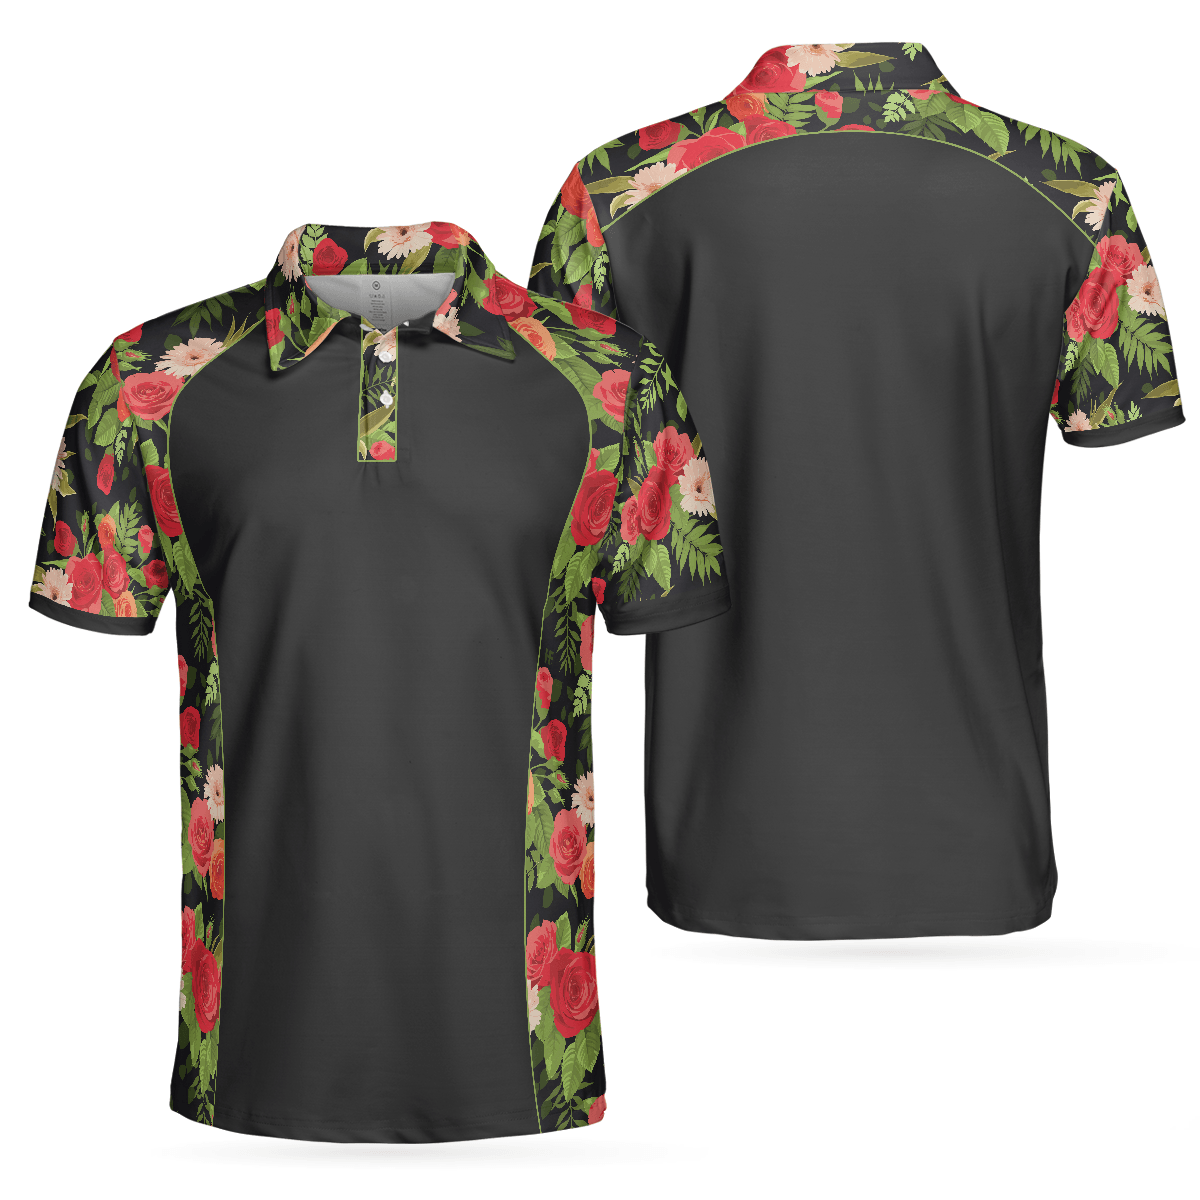 Men Rose Polo Shirt - Tropical Roses Pattern Polo Shirt, Black Polo Shirt With Roses, Print Roses Pattern Shirt For Adults - Perfect Gift For Men - Amzanimalsgift